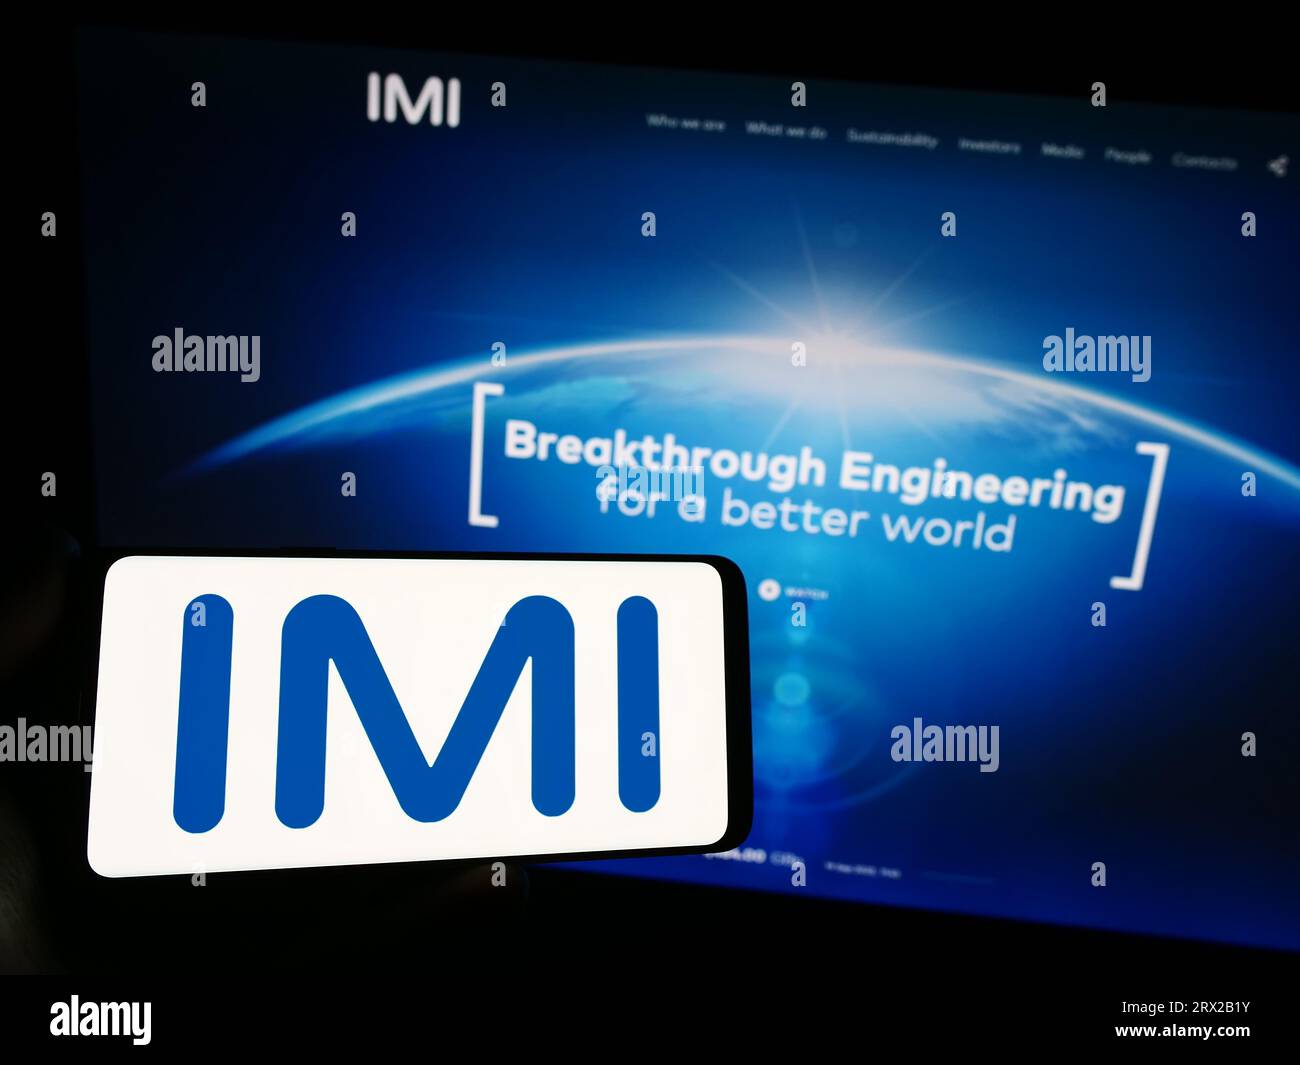 Person holding smartphone with logo of British engineering company IMI plc on screen in front of website. Focus on phone display. Stock Photo